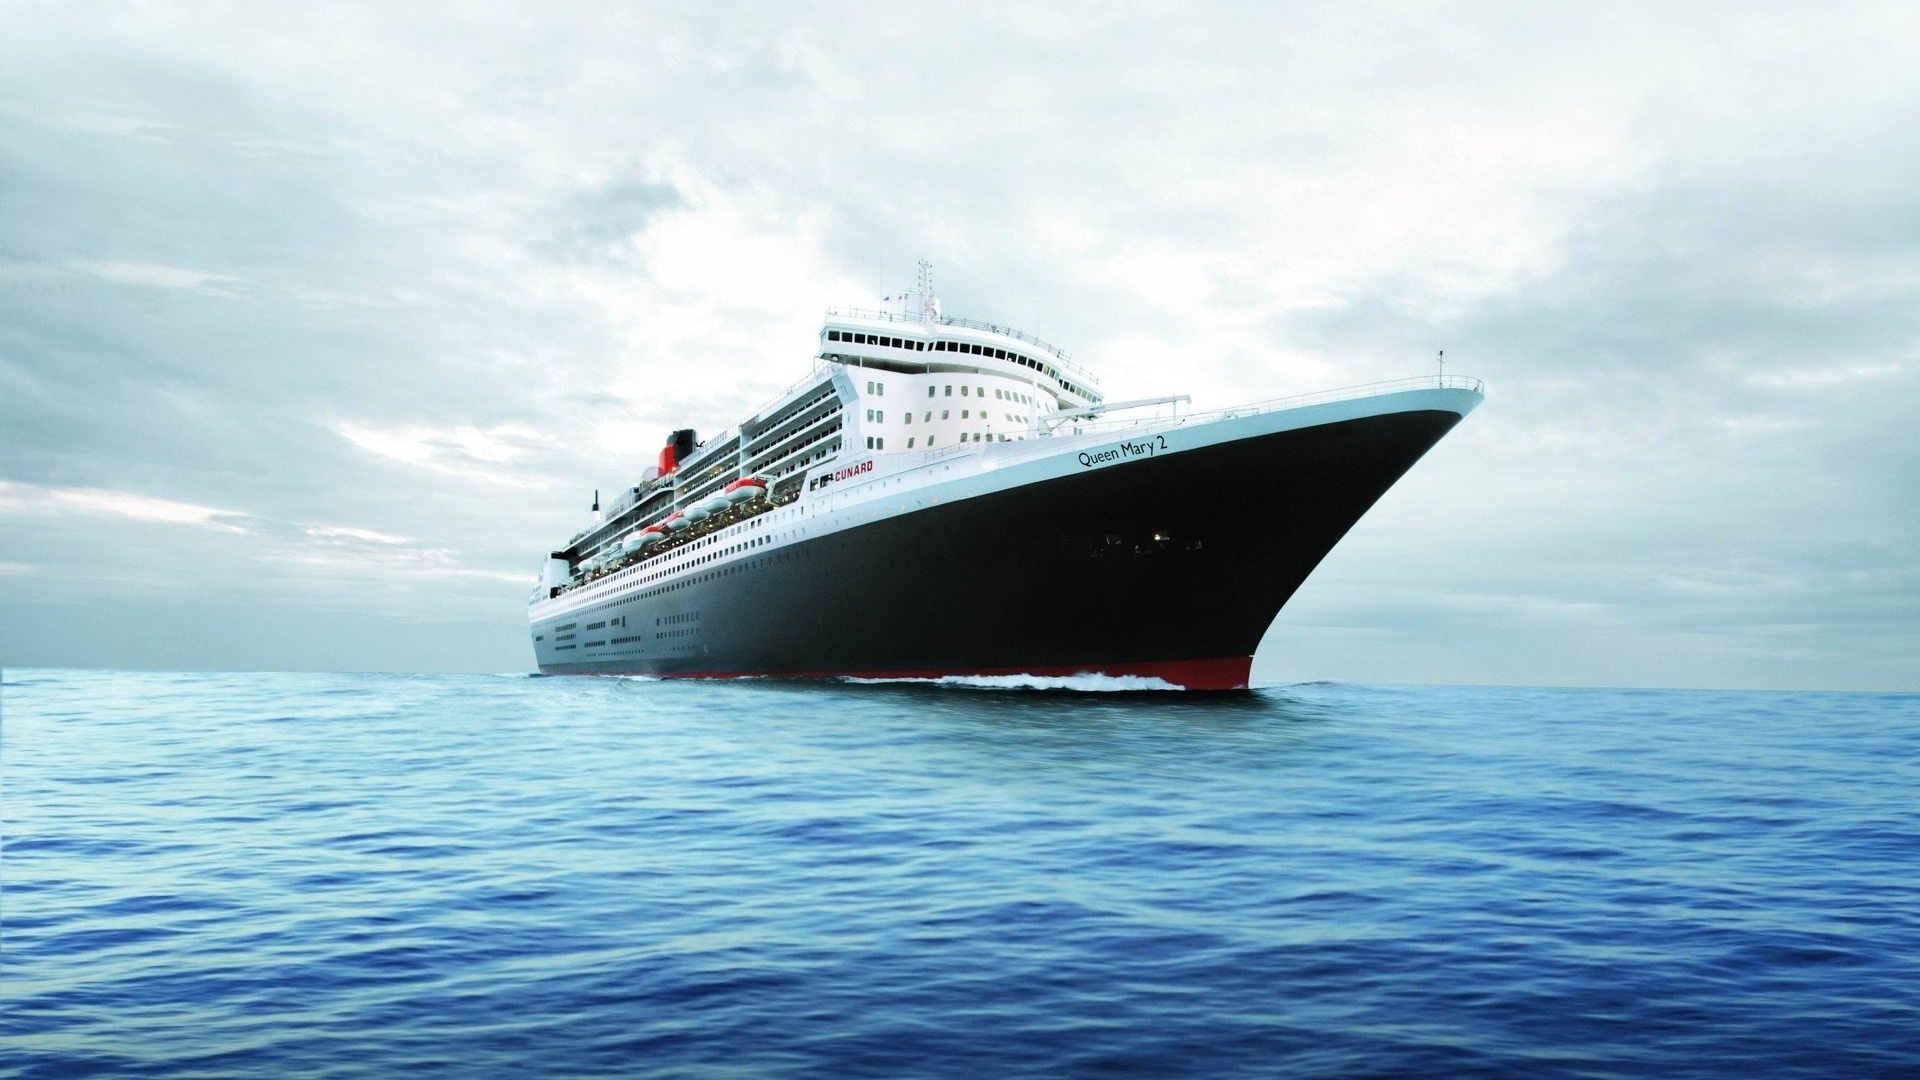 Ship: Cruise liner, Queen Mary 2, A seagoing vessel, Ferry. 1920x1080 Full HD Wallpaper.